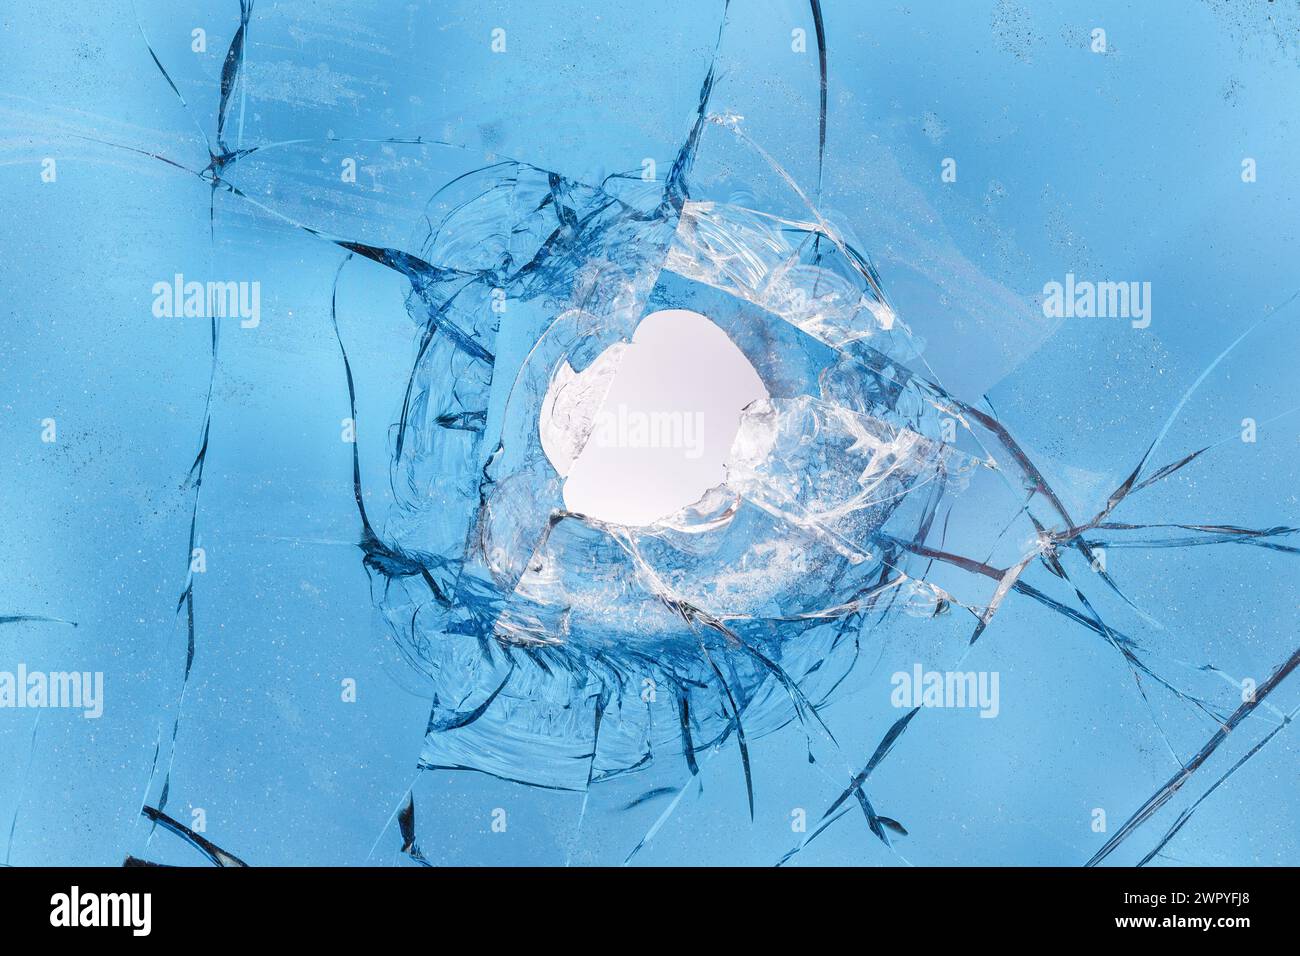 A bullet hole in a car's tinted glass close-up Stock Photo - Alamy